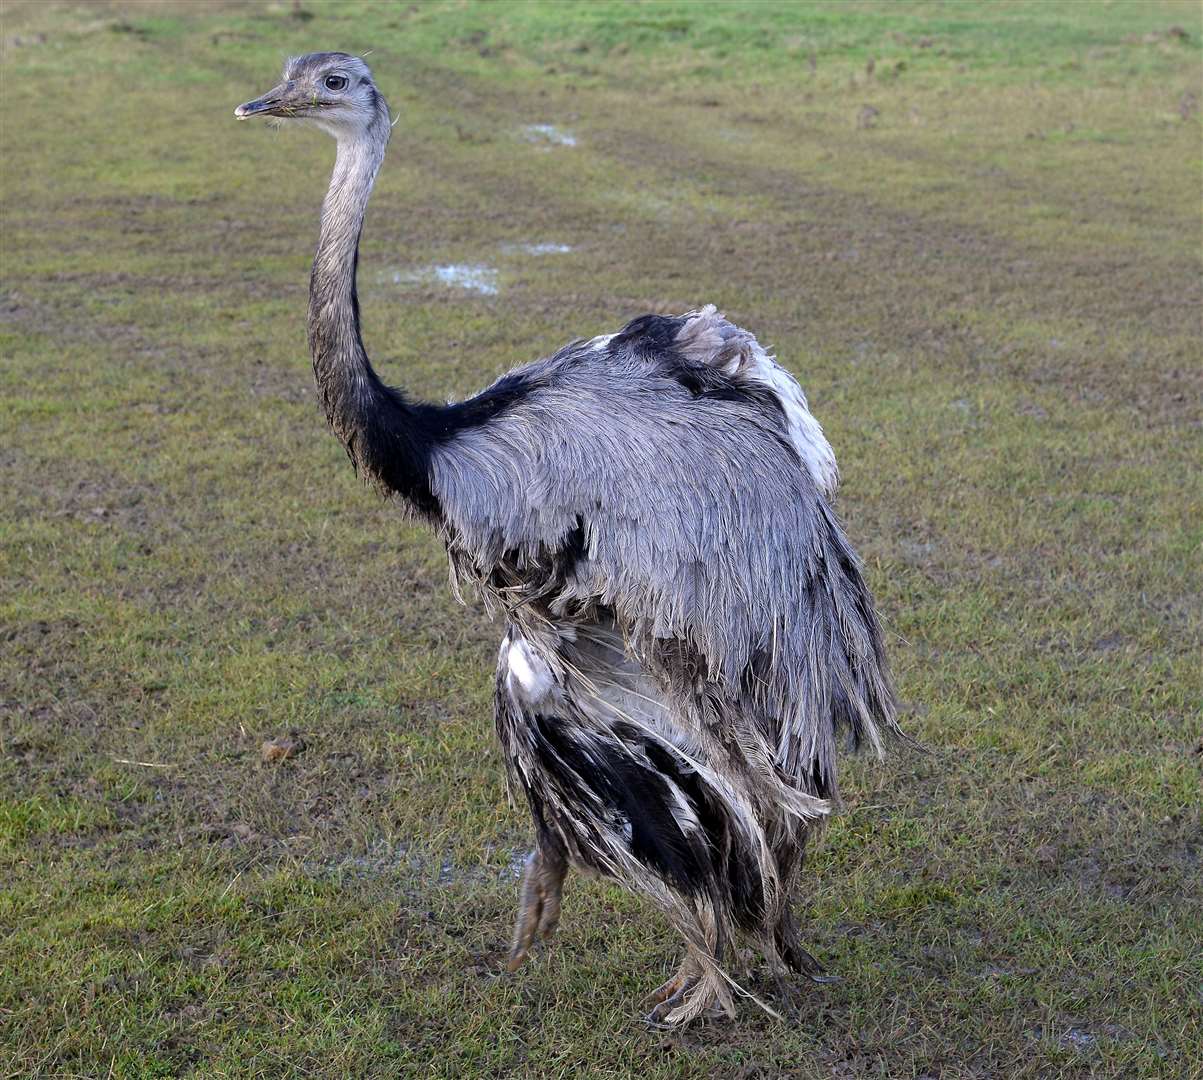 Rheas can grow to 170cm tall and run at speeds of 40mph. Archive picture